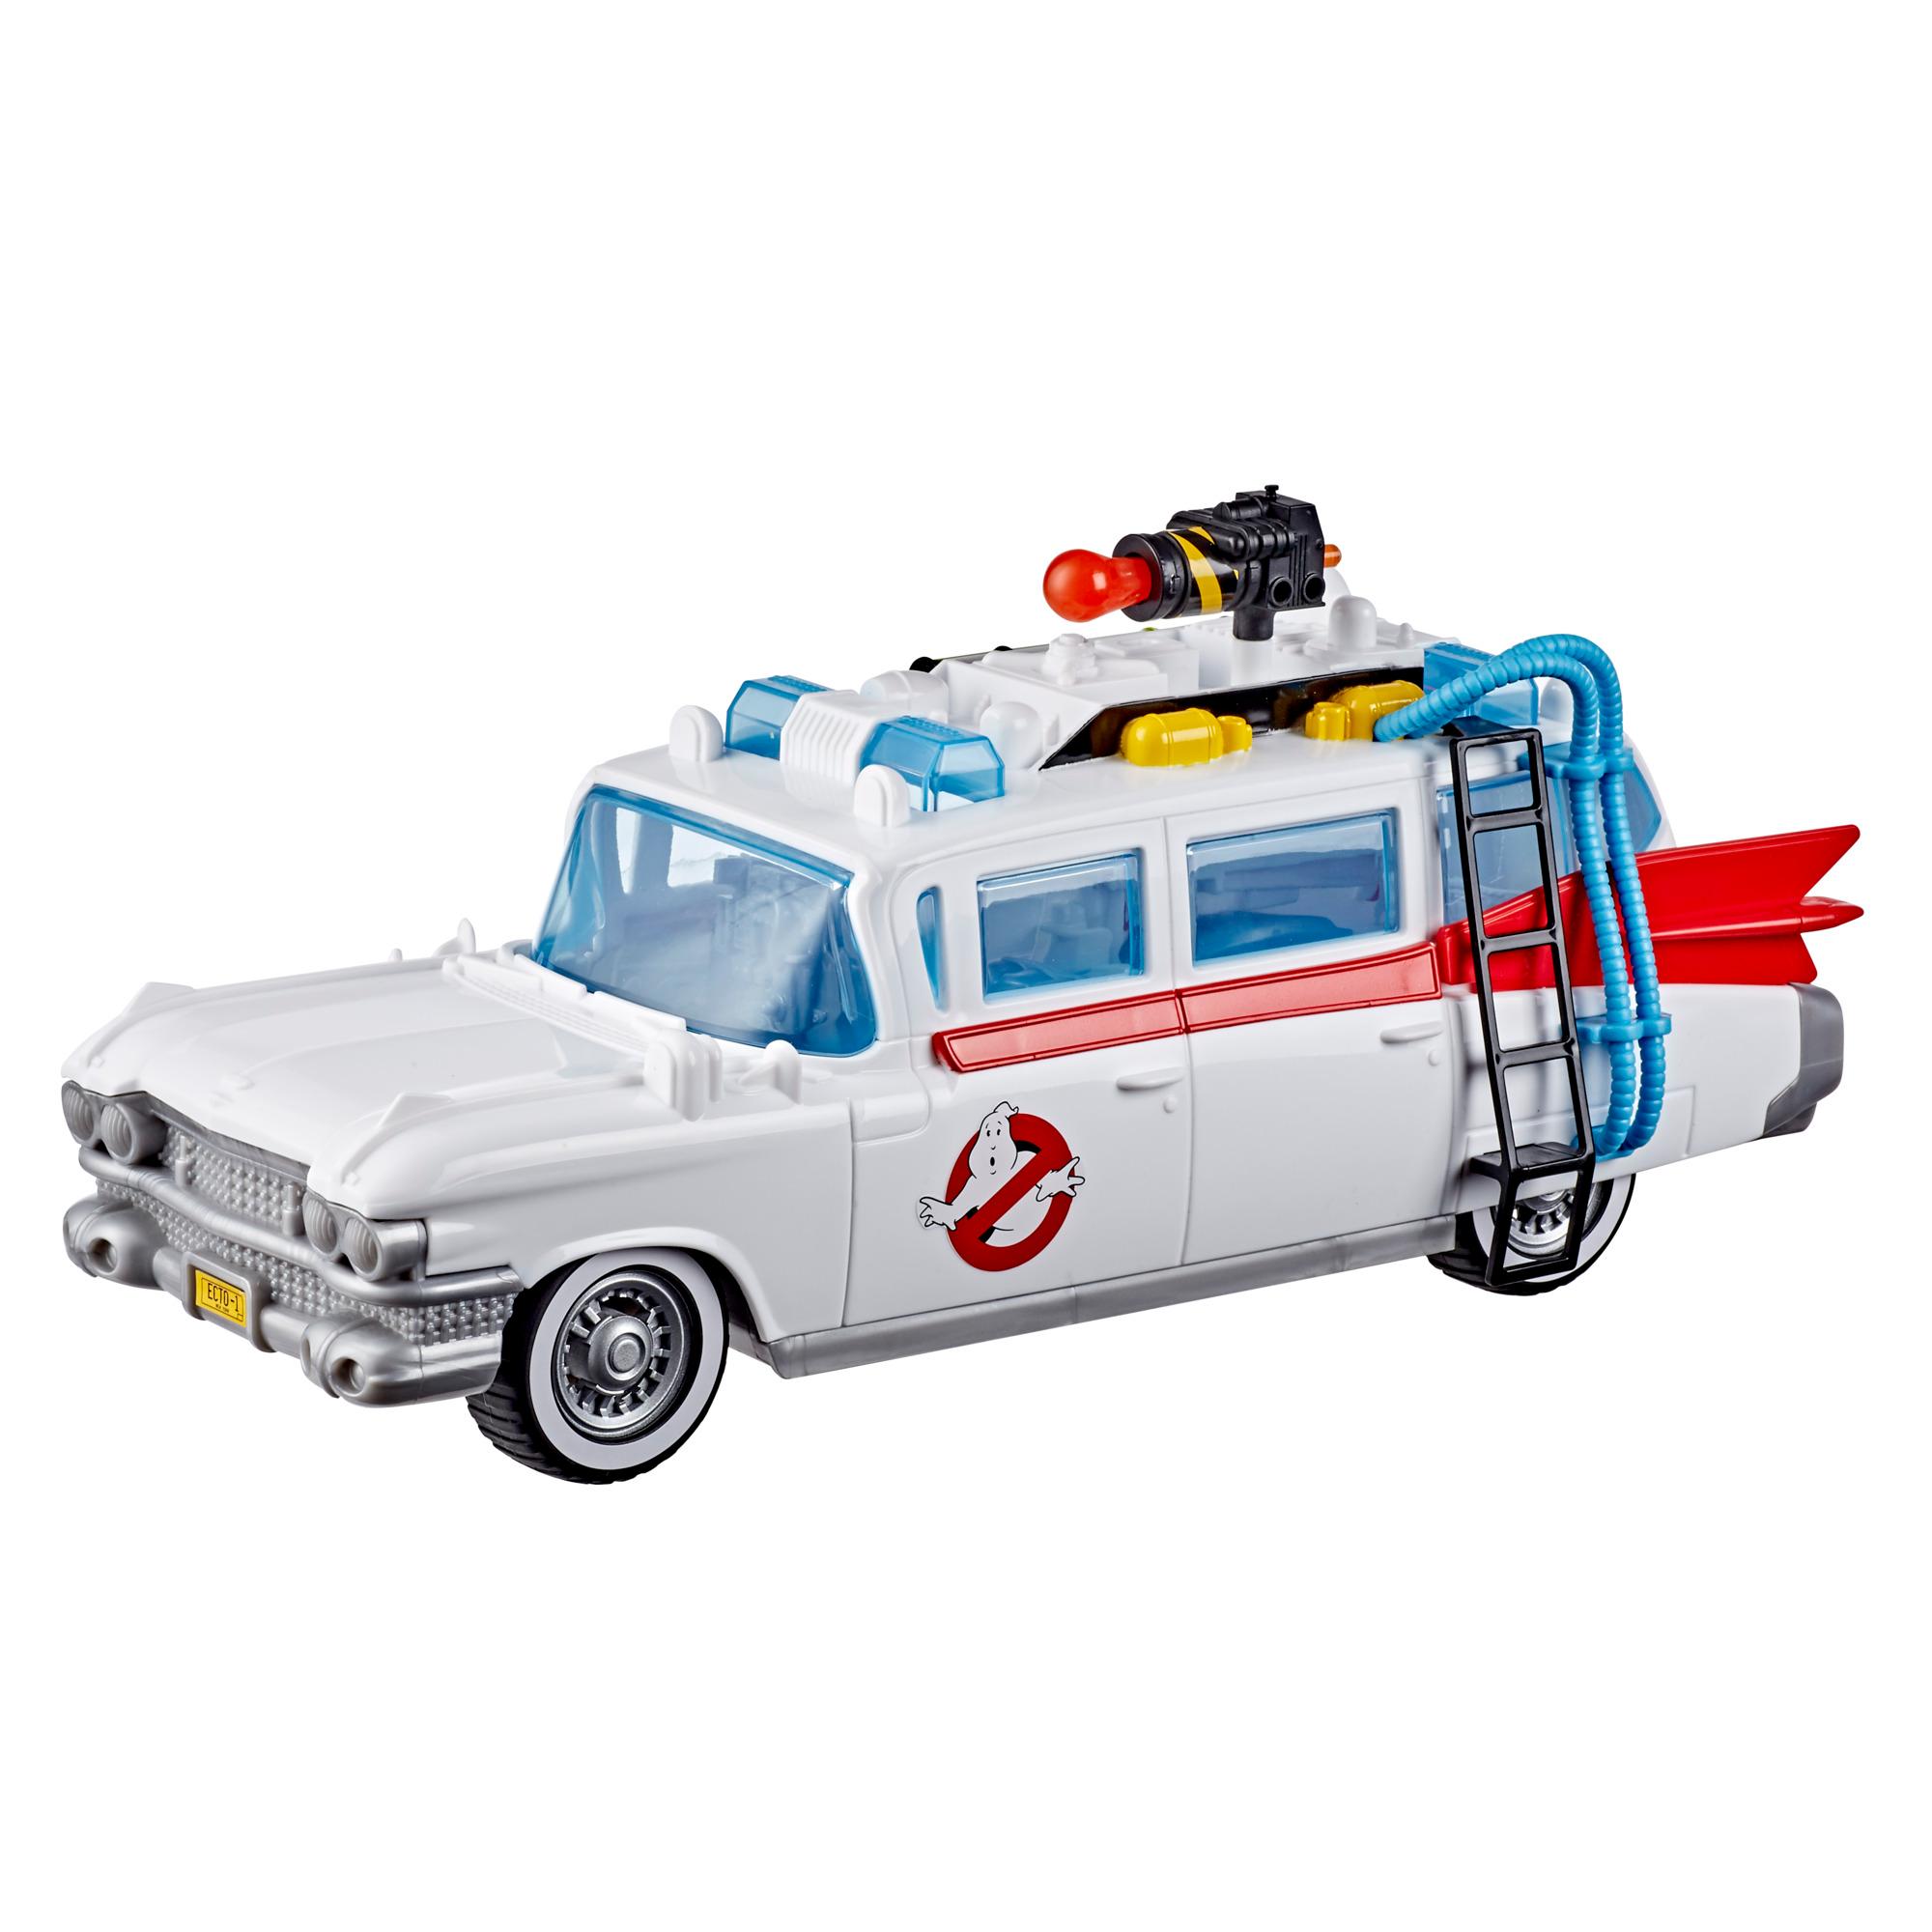 Ghostbusters Movie Ecto-1 Playset with Accessories for Kids Ages 4 and Up  for Kids, Collectors, and Fans - Ghostbusters